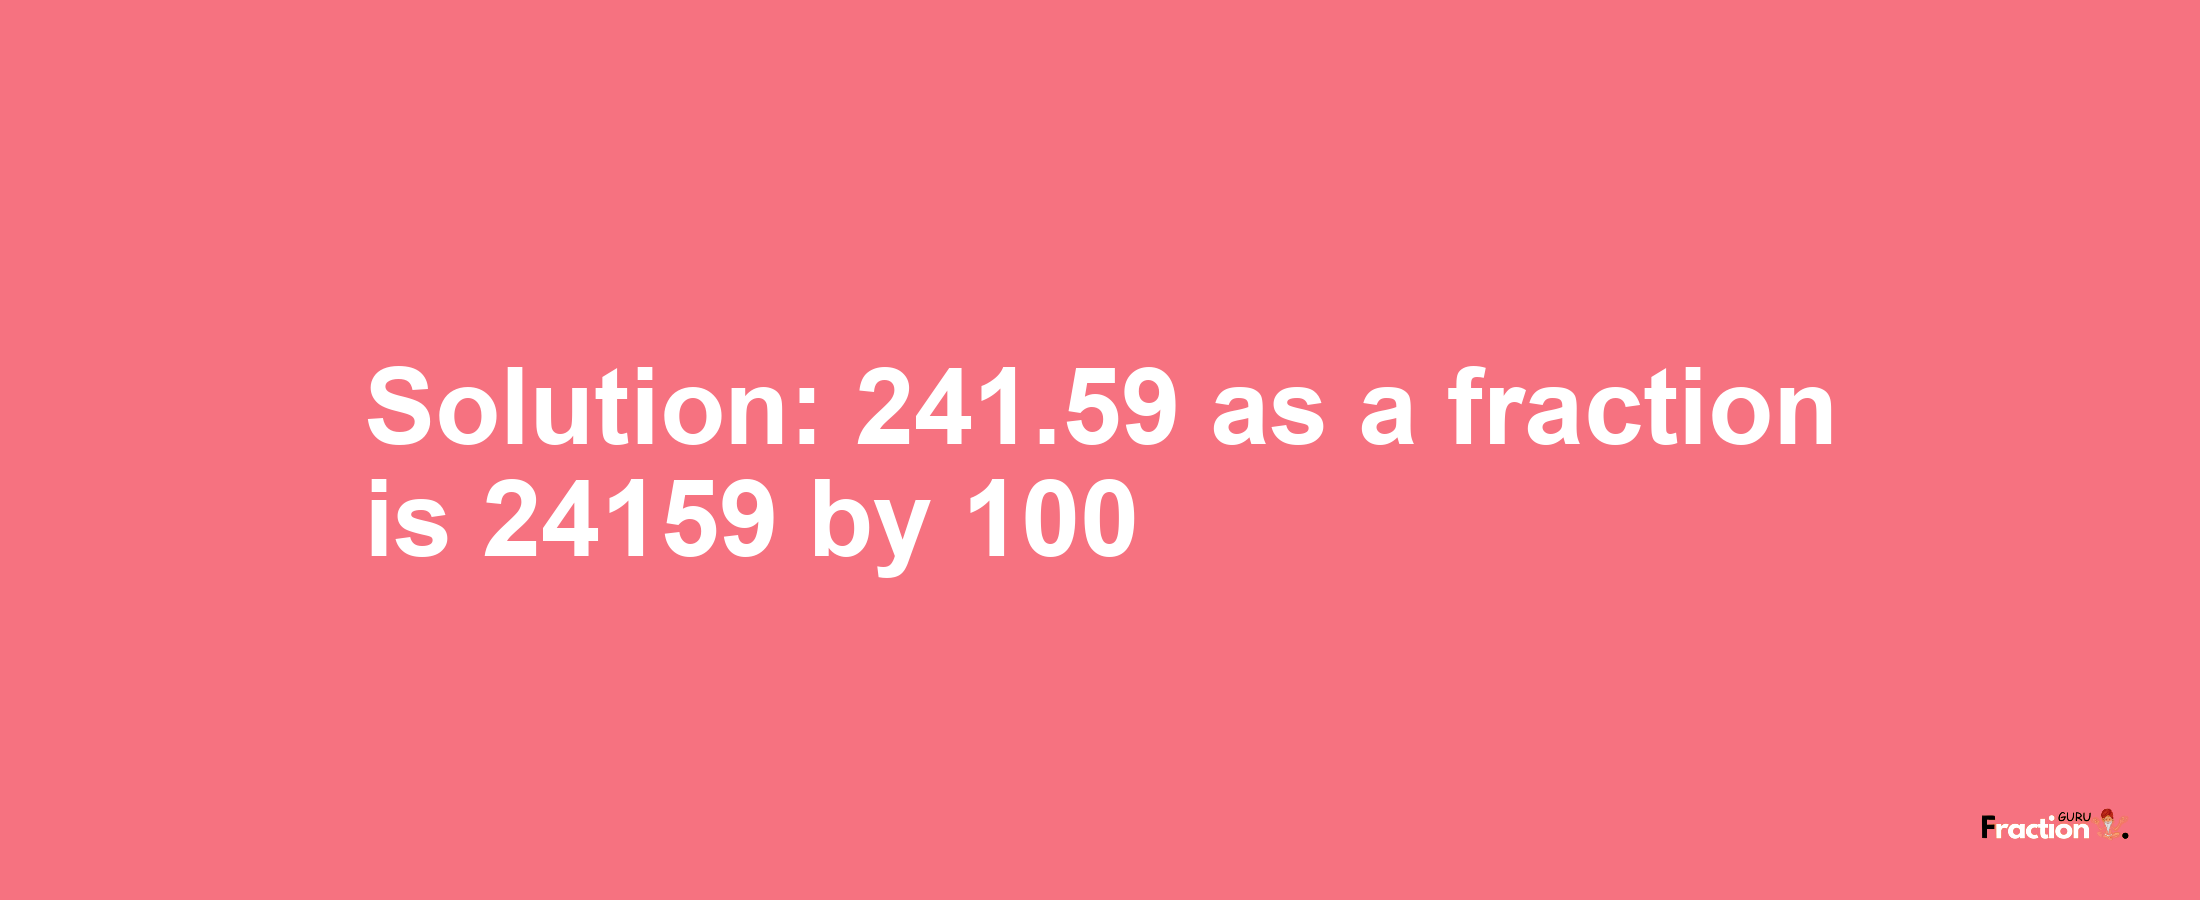 Solution:241.59 as a fraction is 24159/100